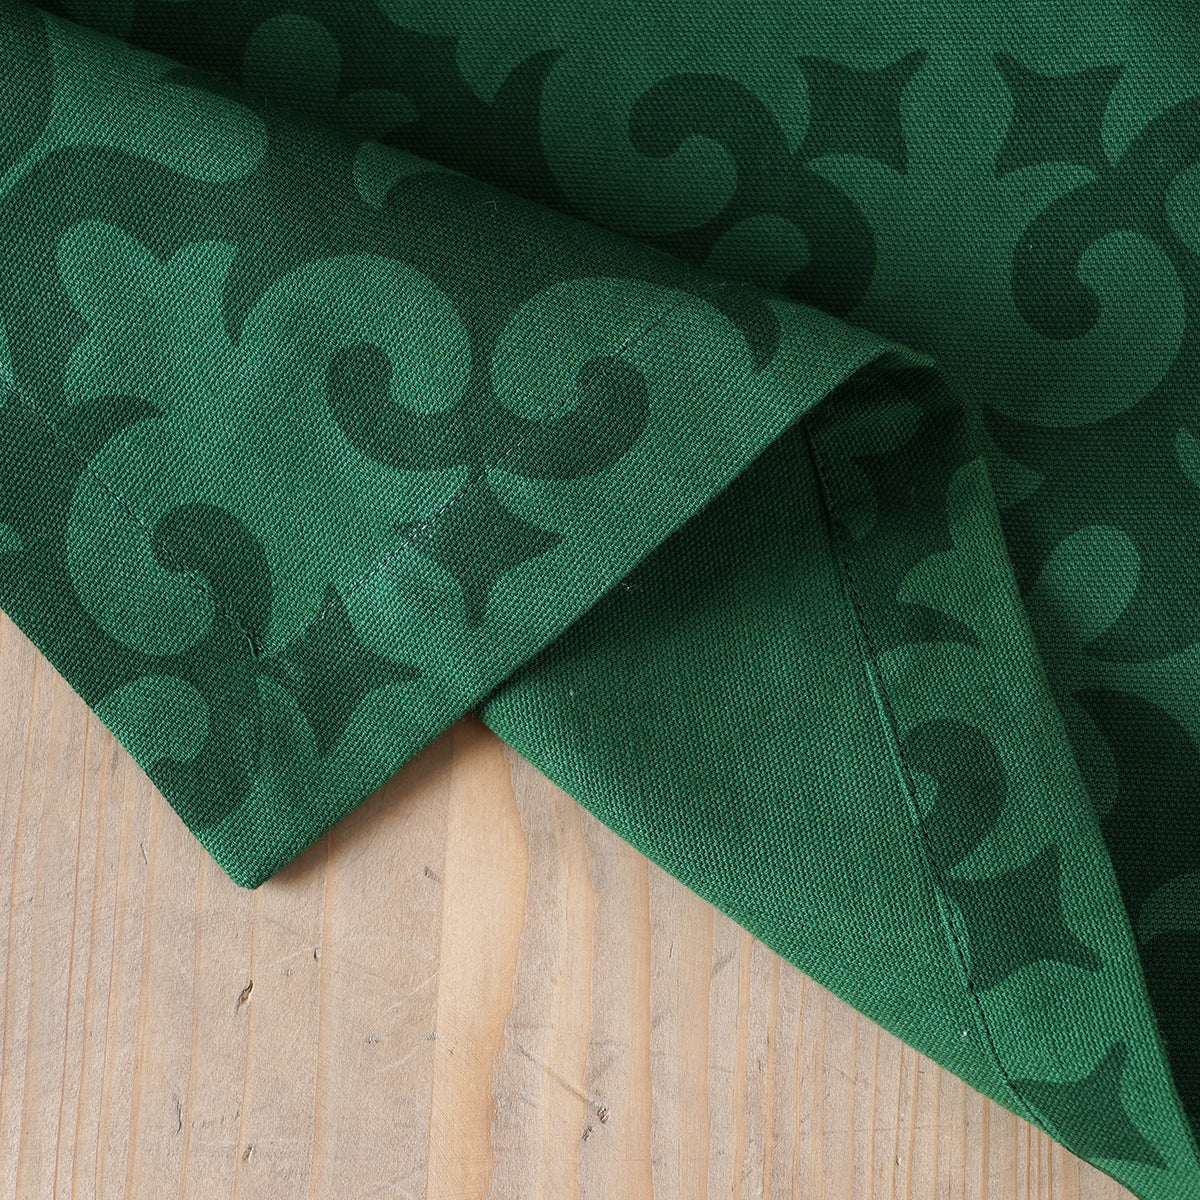 Tropical Green table cloth, moroccan print on 100% cotton, sizes available